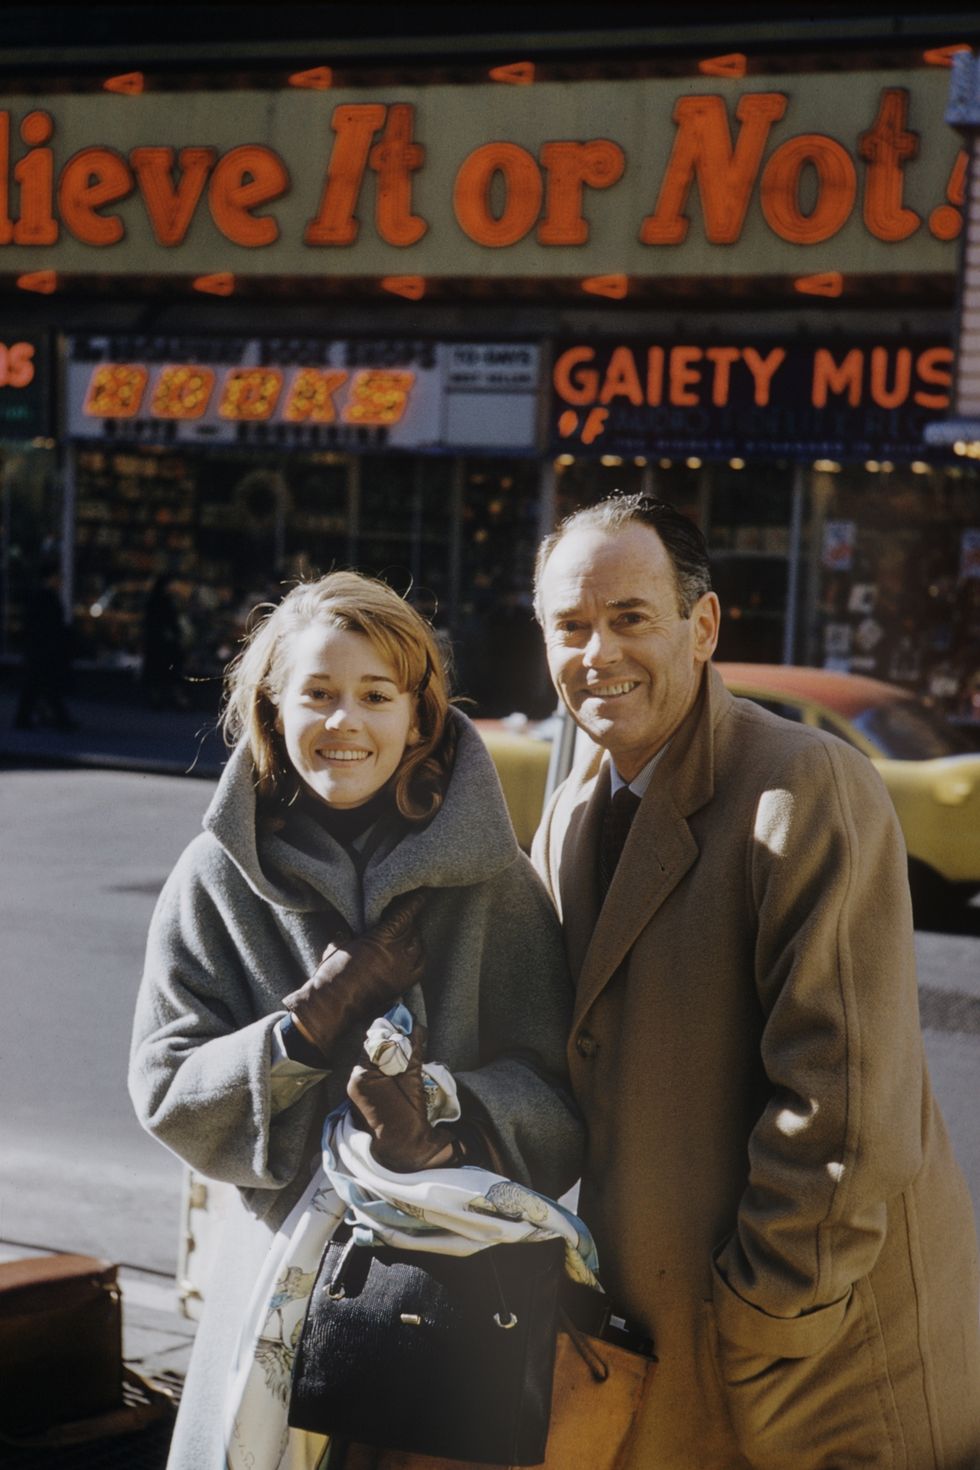 actor henry fonda and daughter jane  standing outside ripleys believe it or not in times square, new york city, new york, united states, 1960photo by leonard mccombethe life picture collection via getty images